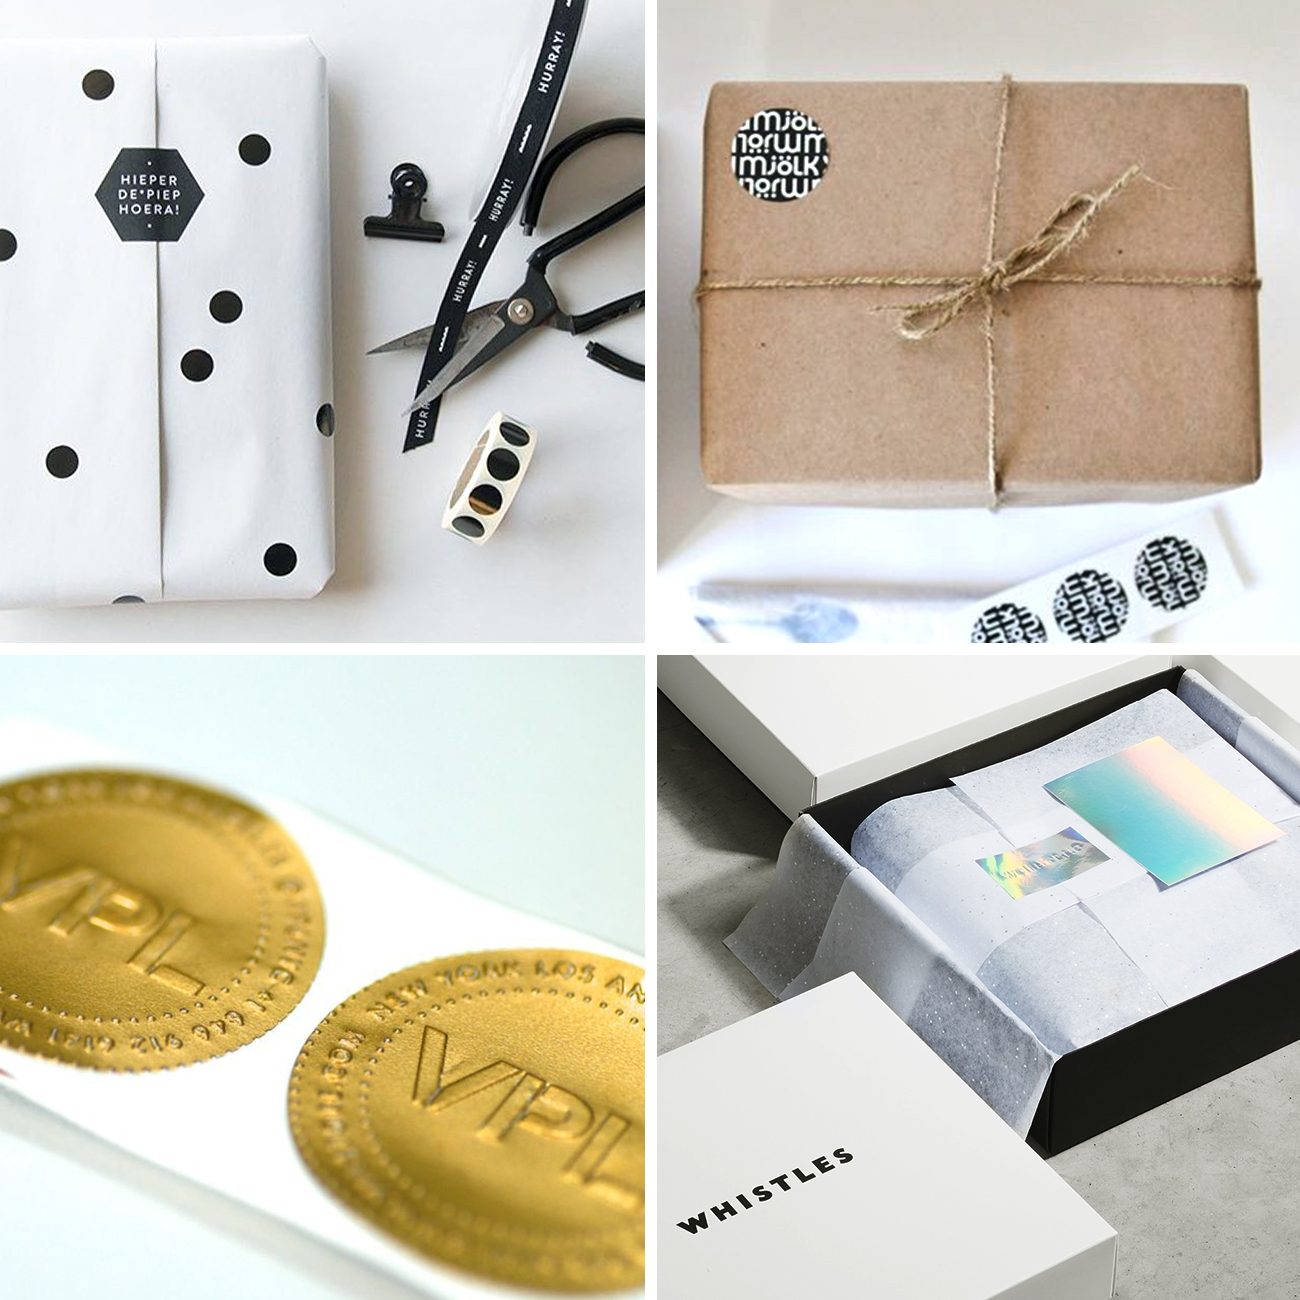 Photos via: Buorx, Kado Design, Salita Bacchi, VPL store, Surface and Form 90 Ideas to Spruce Up Your Holiday Packaging Design